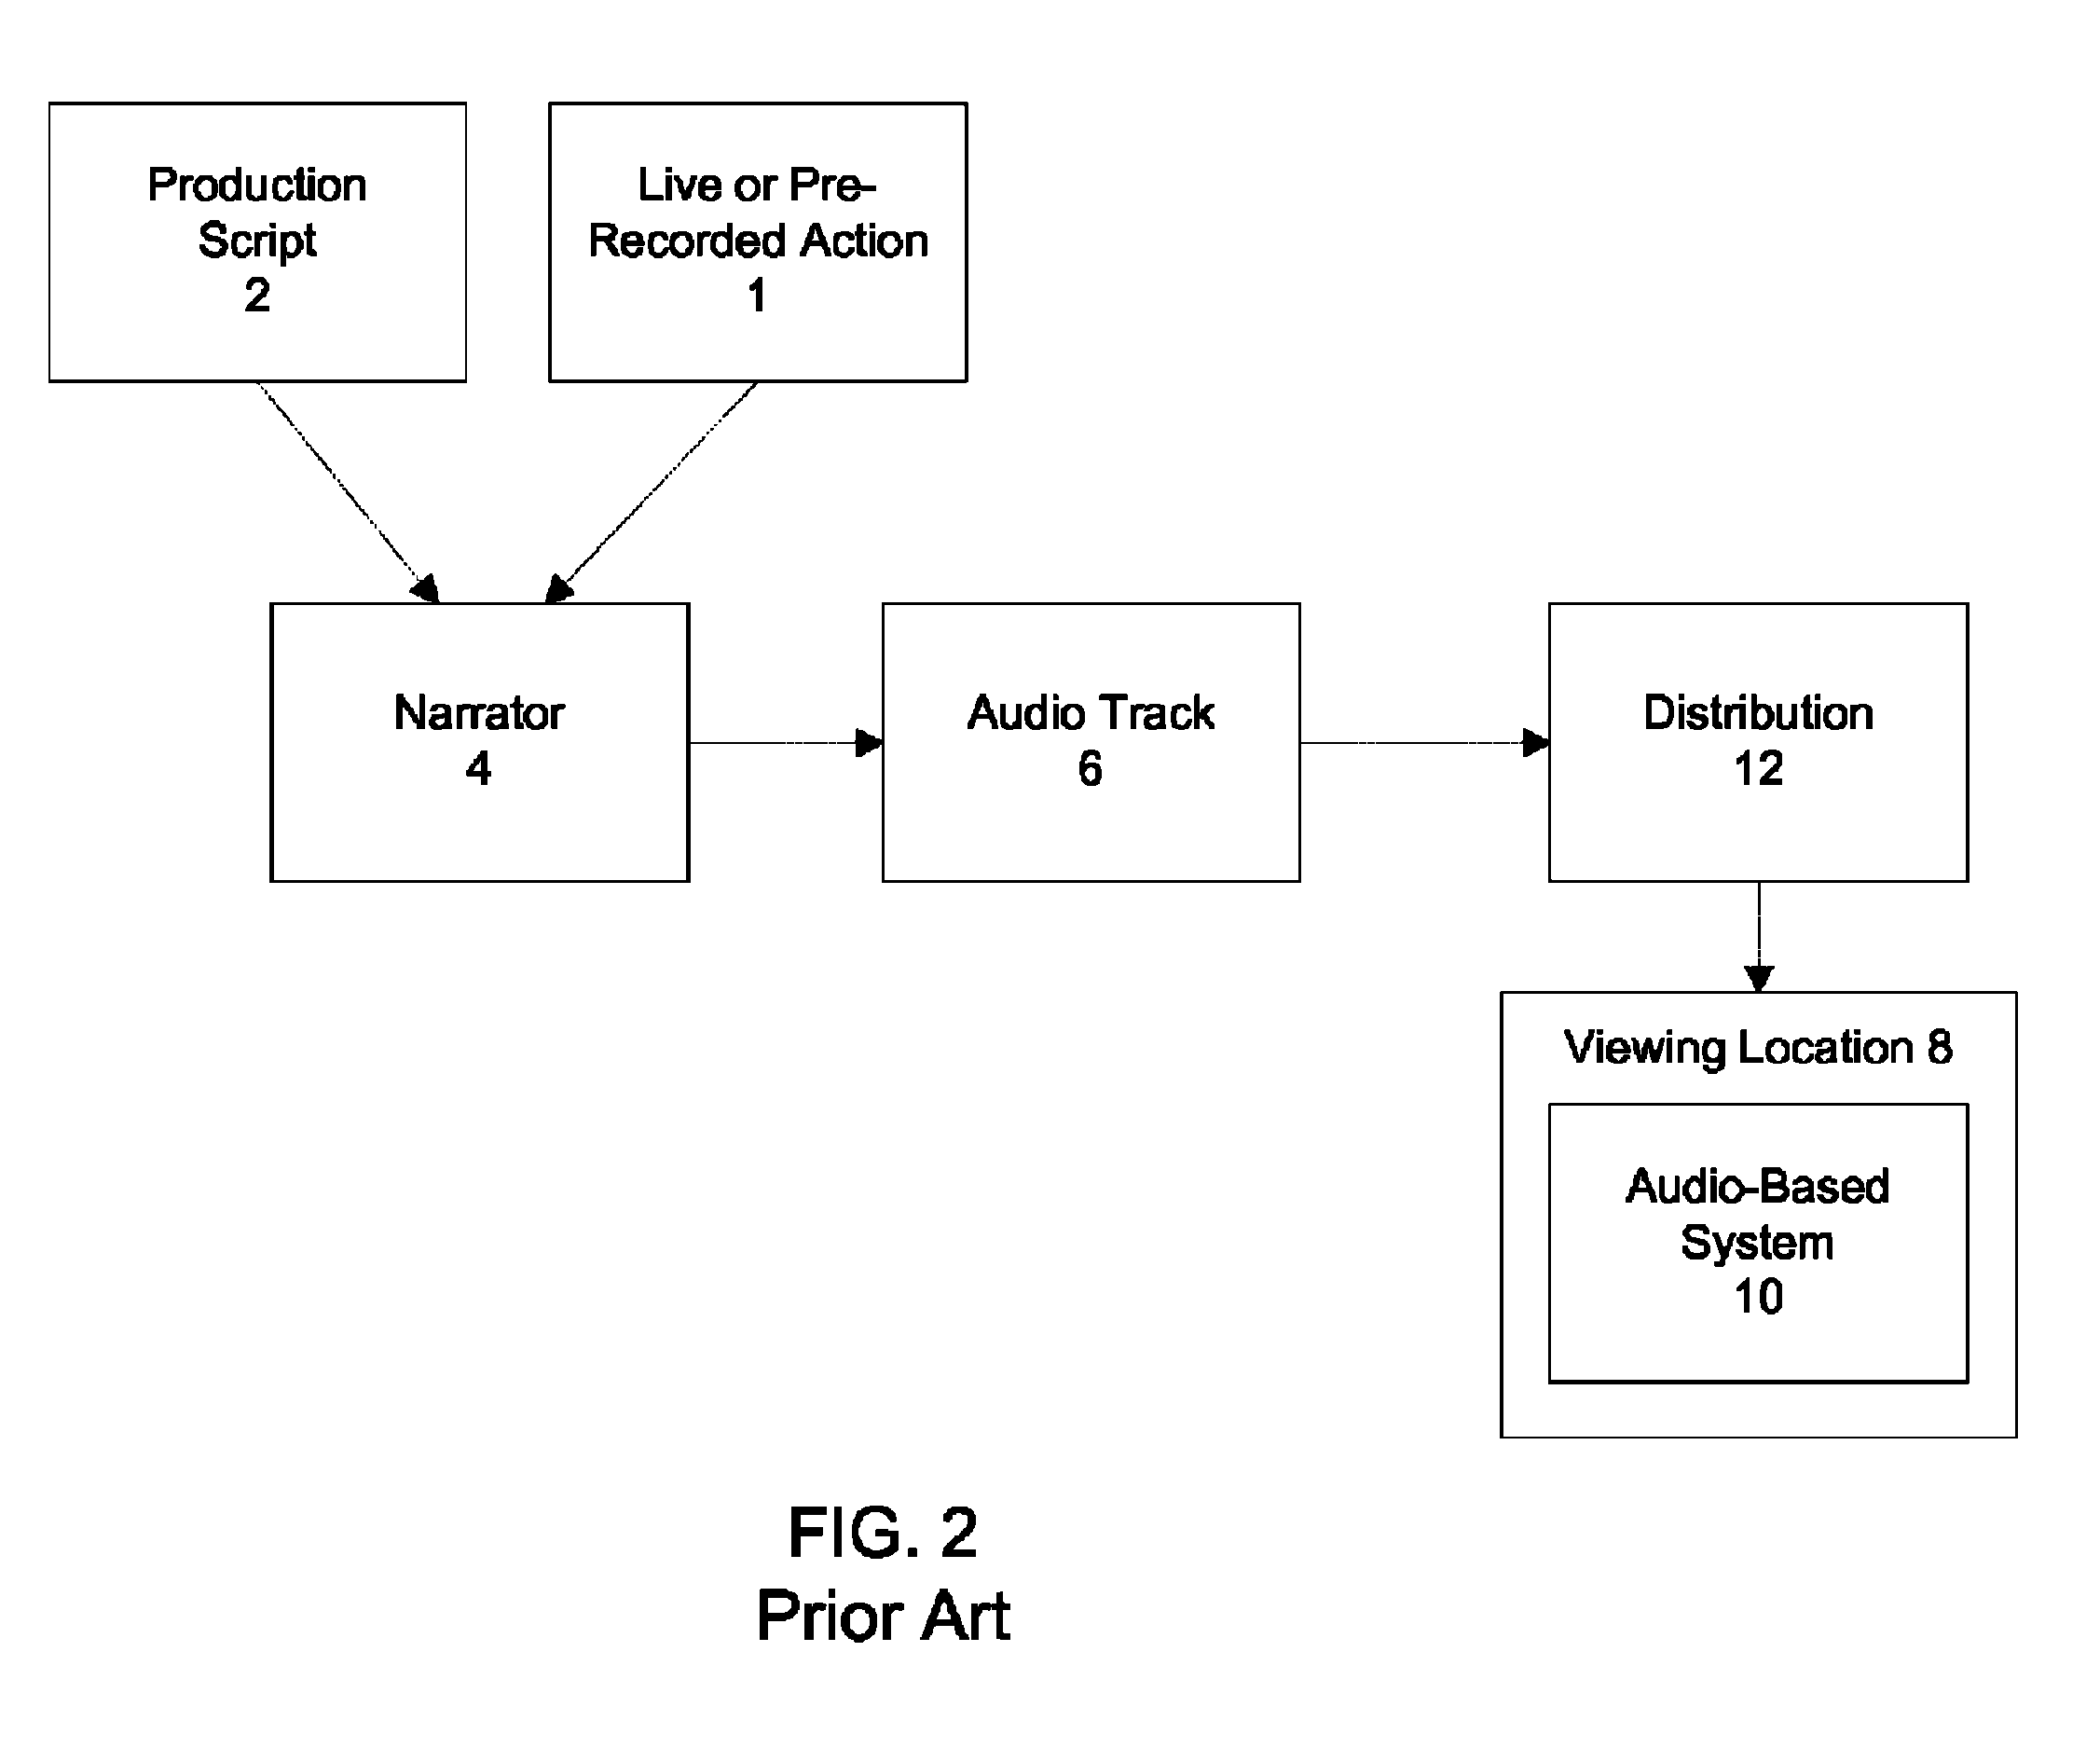 Method and process for text-based assistive program descriptions for television